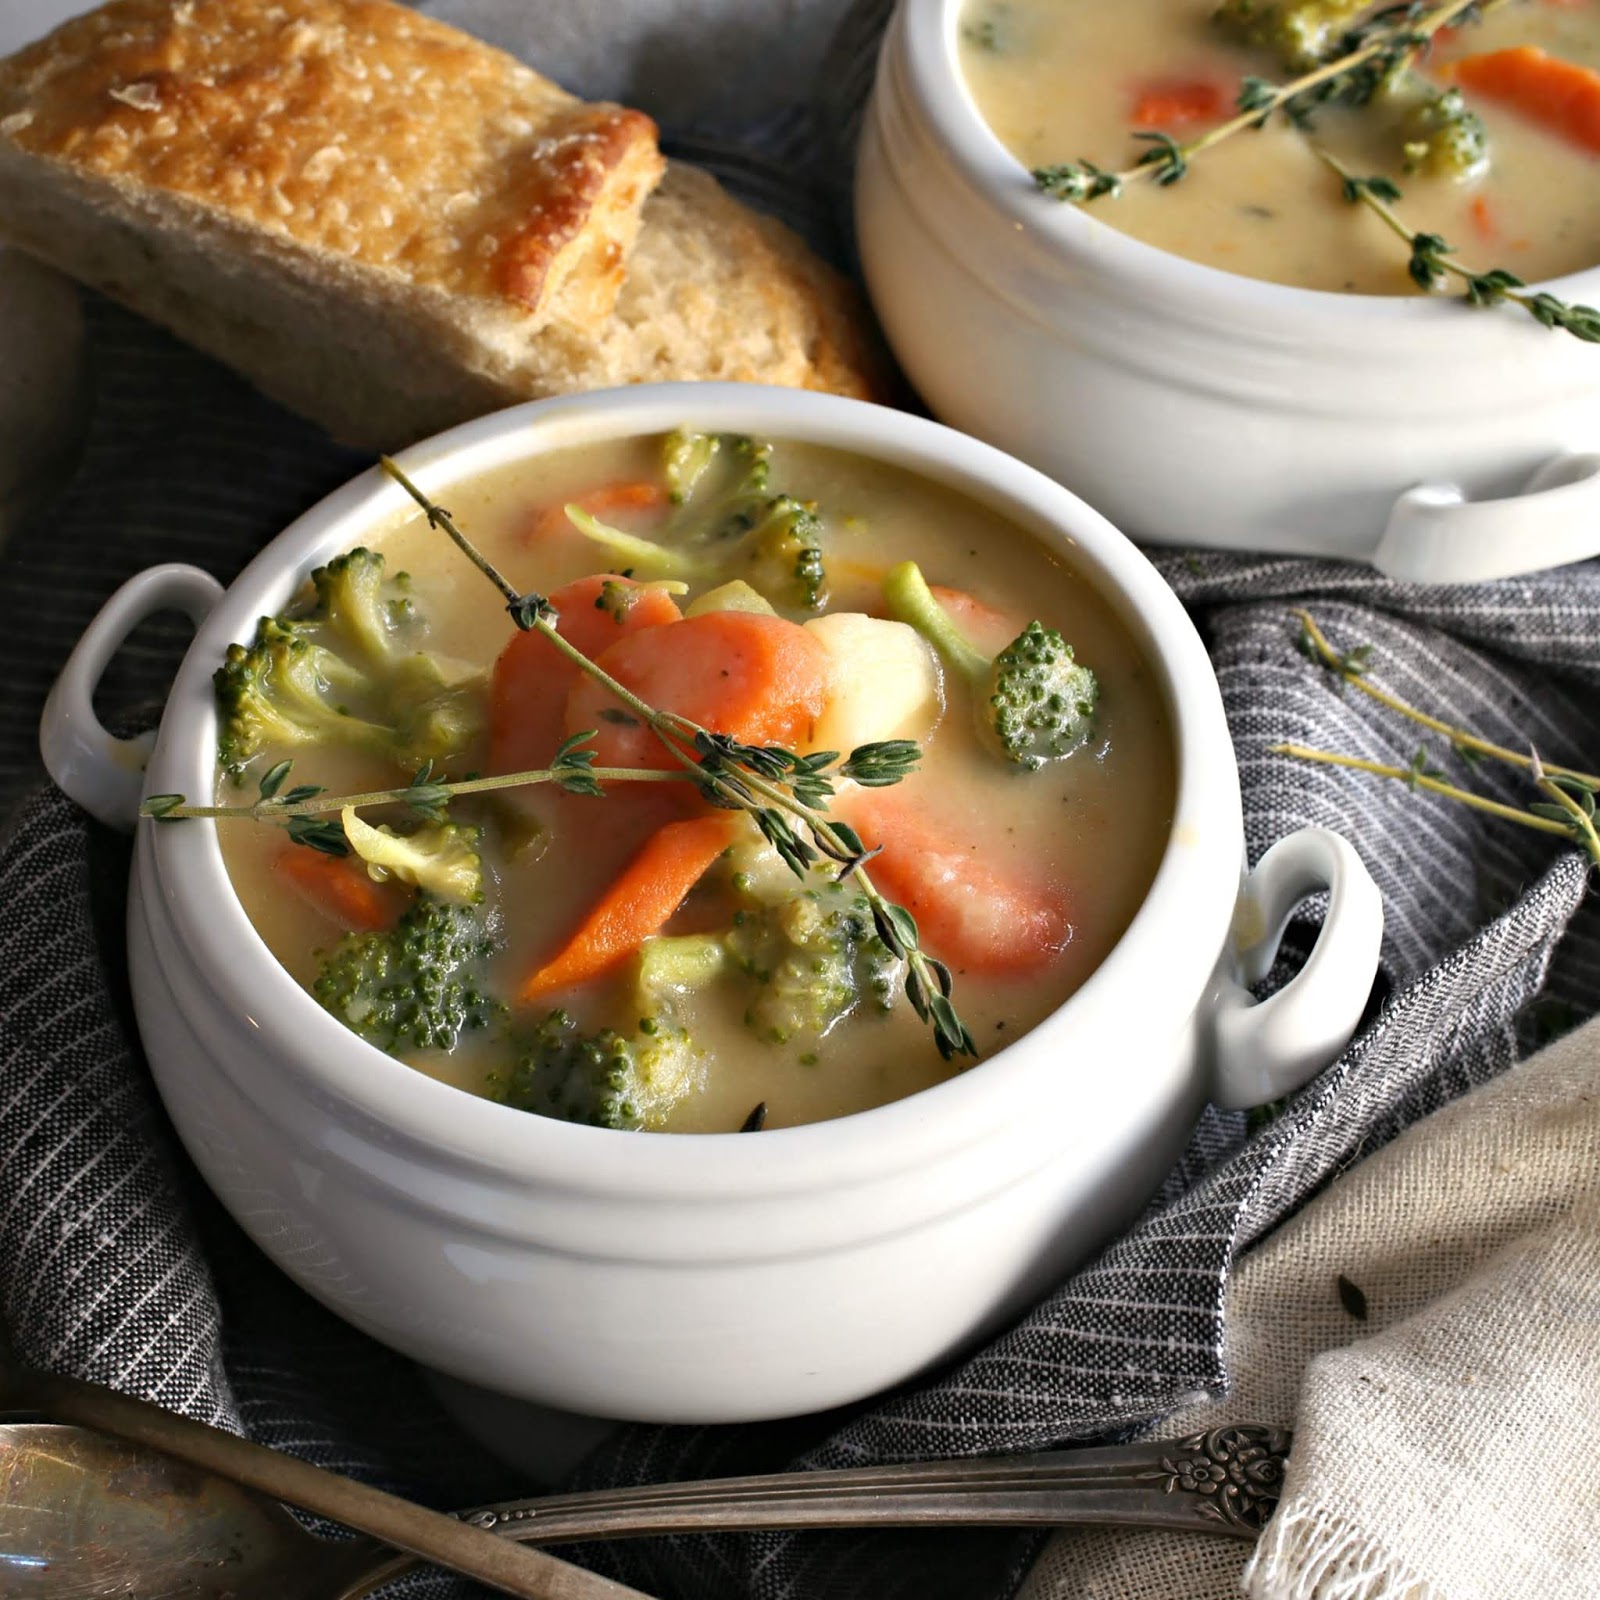 Creamy vegetable soup with cheddar cheese.